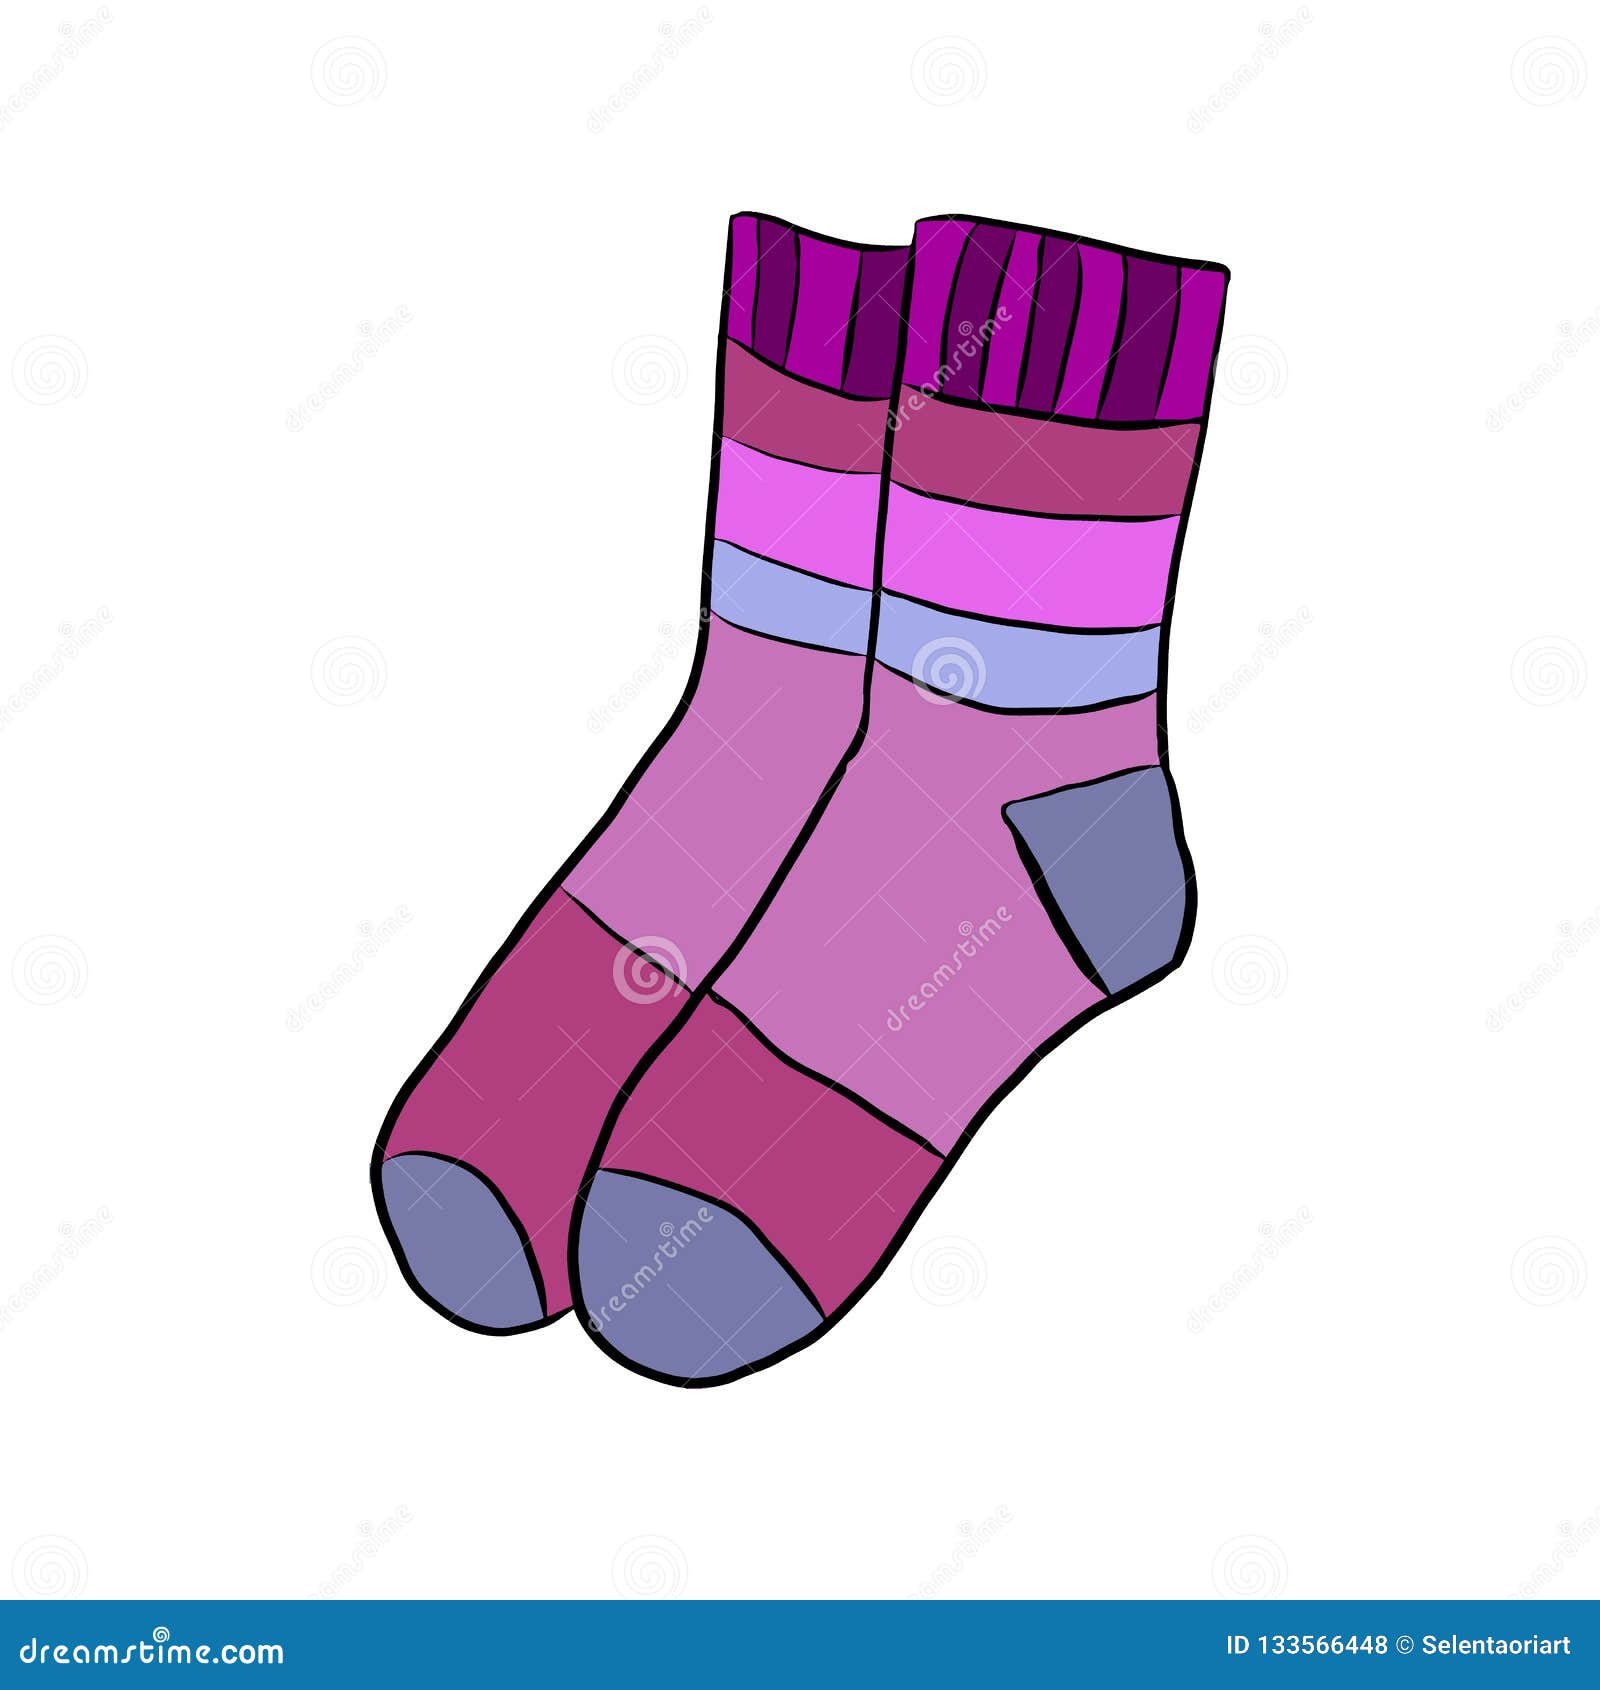 Socks Vector Icon Isolated on Stock Vector - Illustration of colorful ...